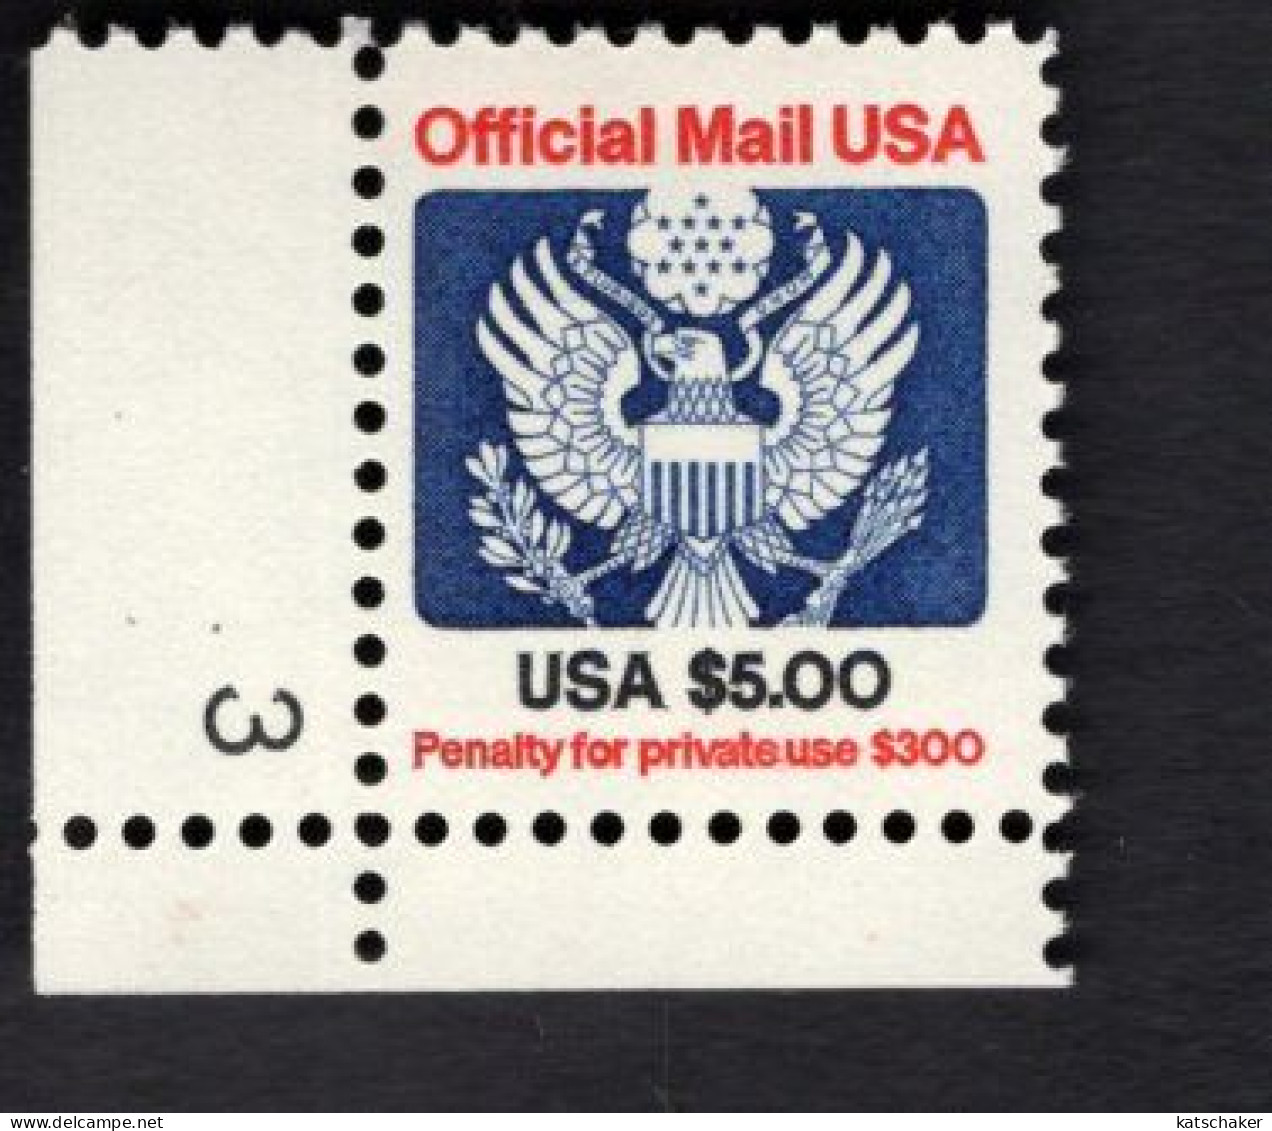 2008964903 1983 (XX) SCOTT O133 POSTFRIS MINT NEVER HINGED  Eagle And Shield Bird Vogel OFFICIAL MAIL PLATE 3 - Servizio